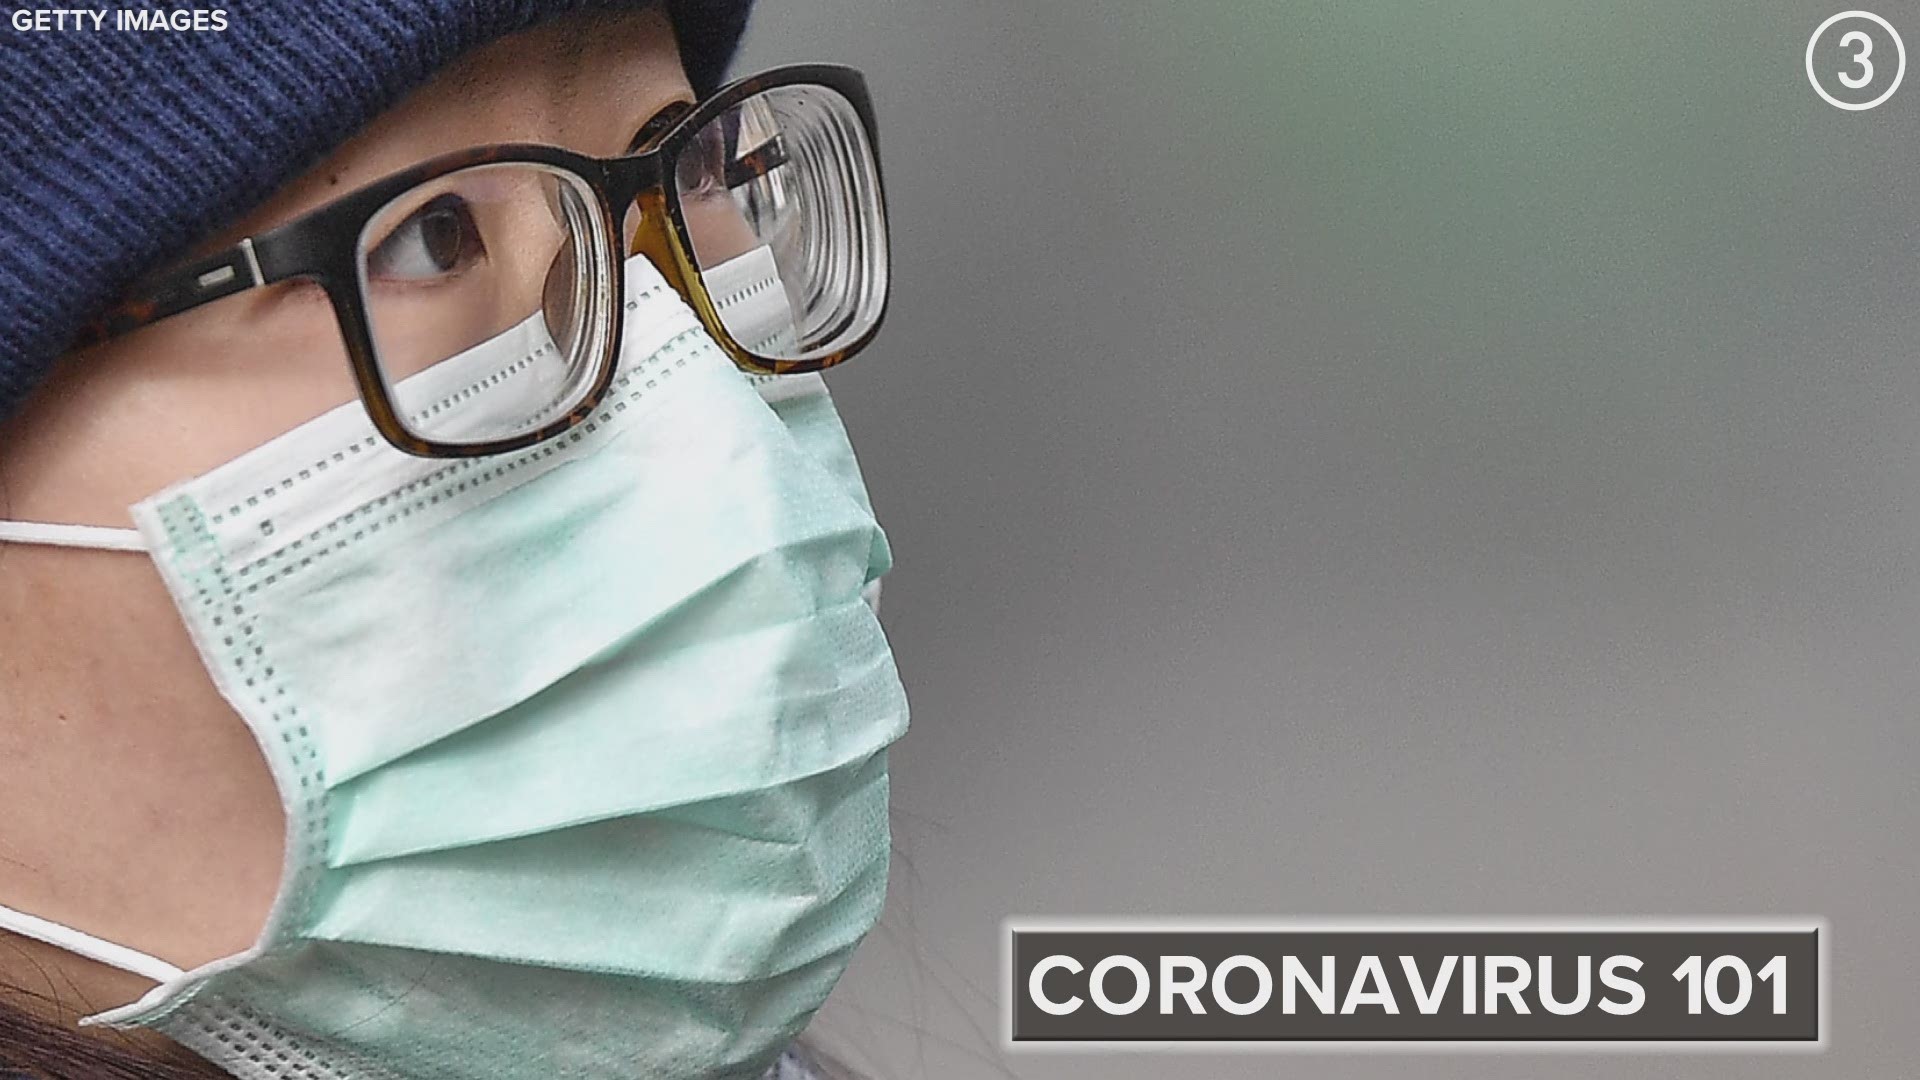 Laying out the facts of the coronavirus.  As of March 3rd, there have been 9 deaths in the United States.